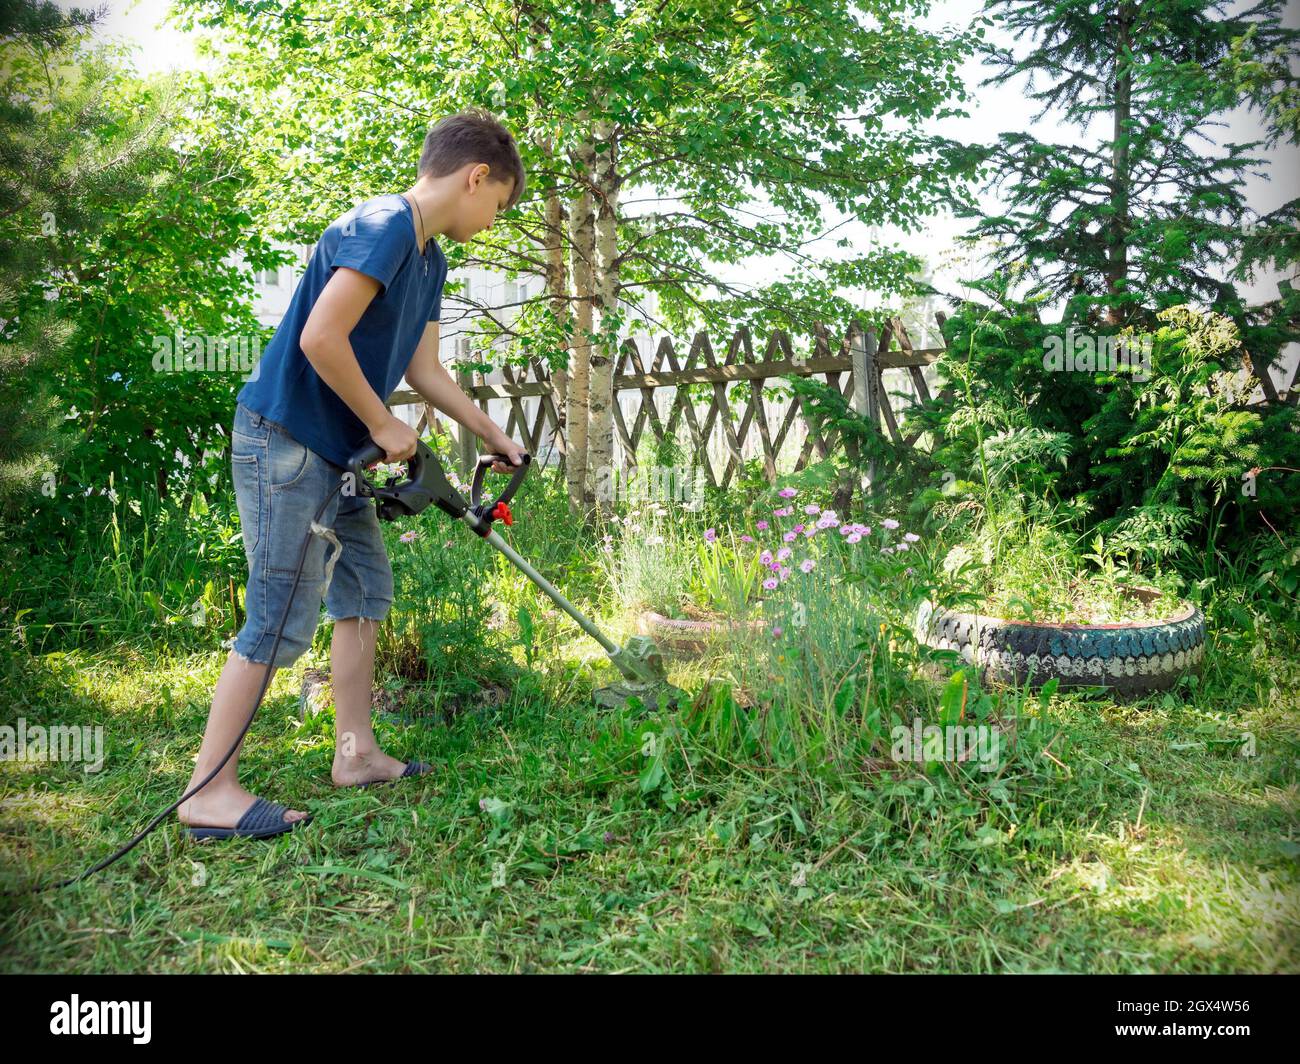 A boy, 11 years old, mows the lawn with an electric scythe near the trees in the yard of a house on a sunny summer day. Stock Photo